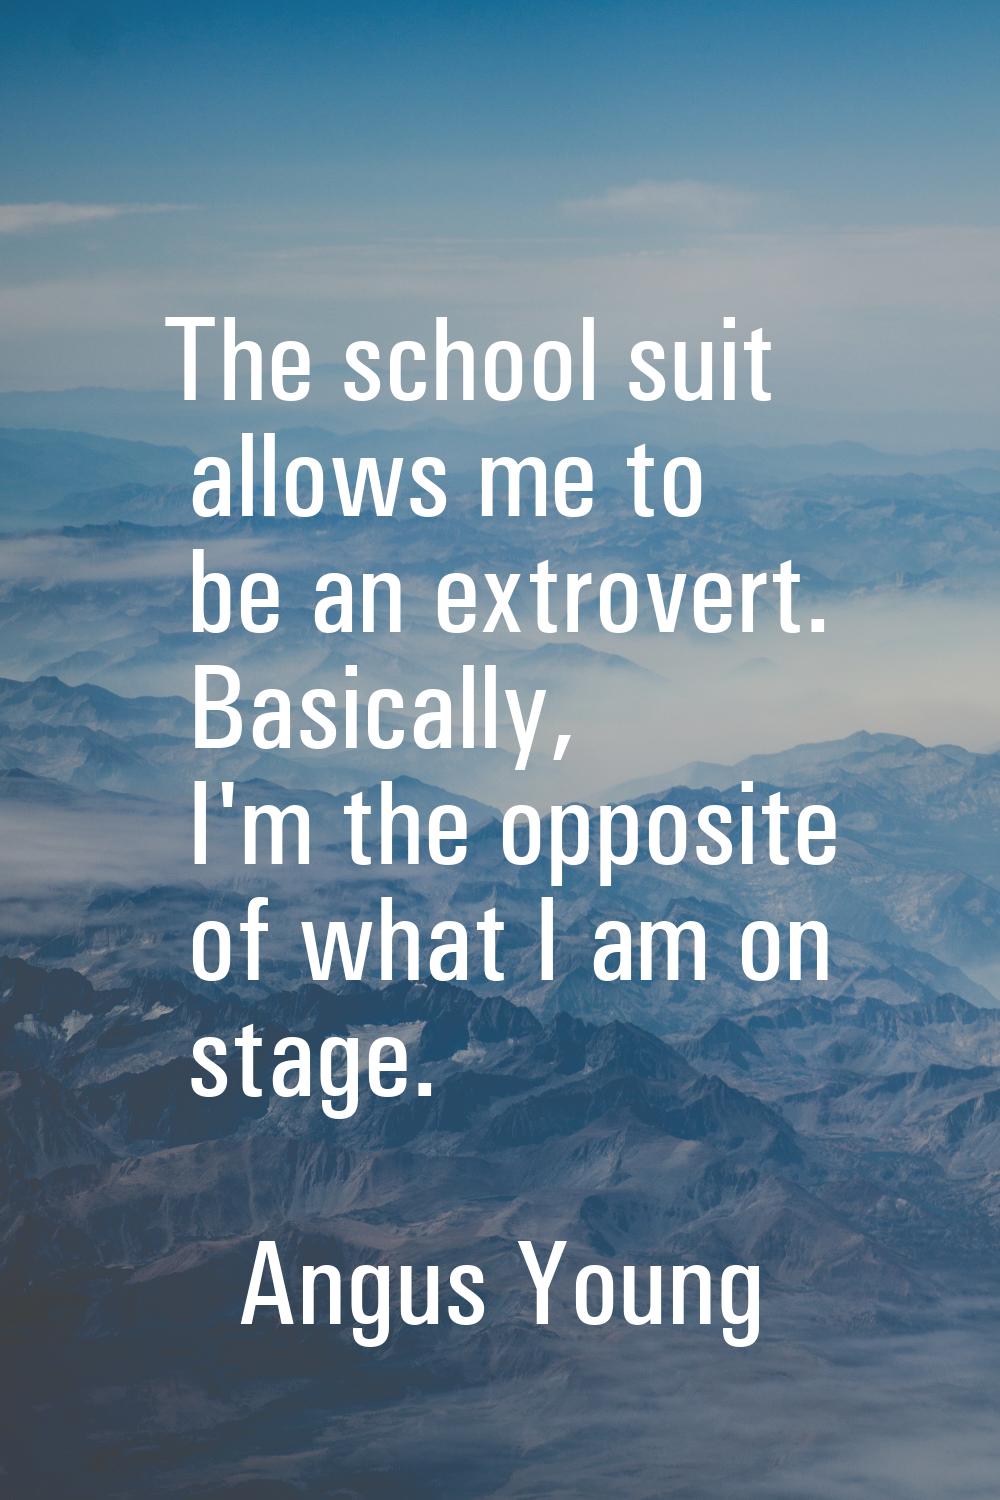 The school suit allows me to be an extrovert. Basically, I'm the opposite of what I am on stage.